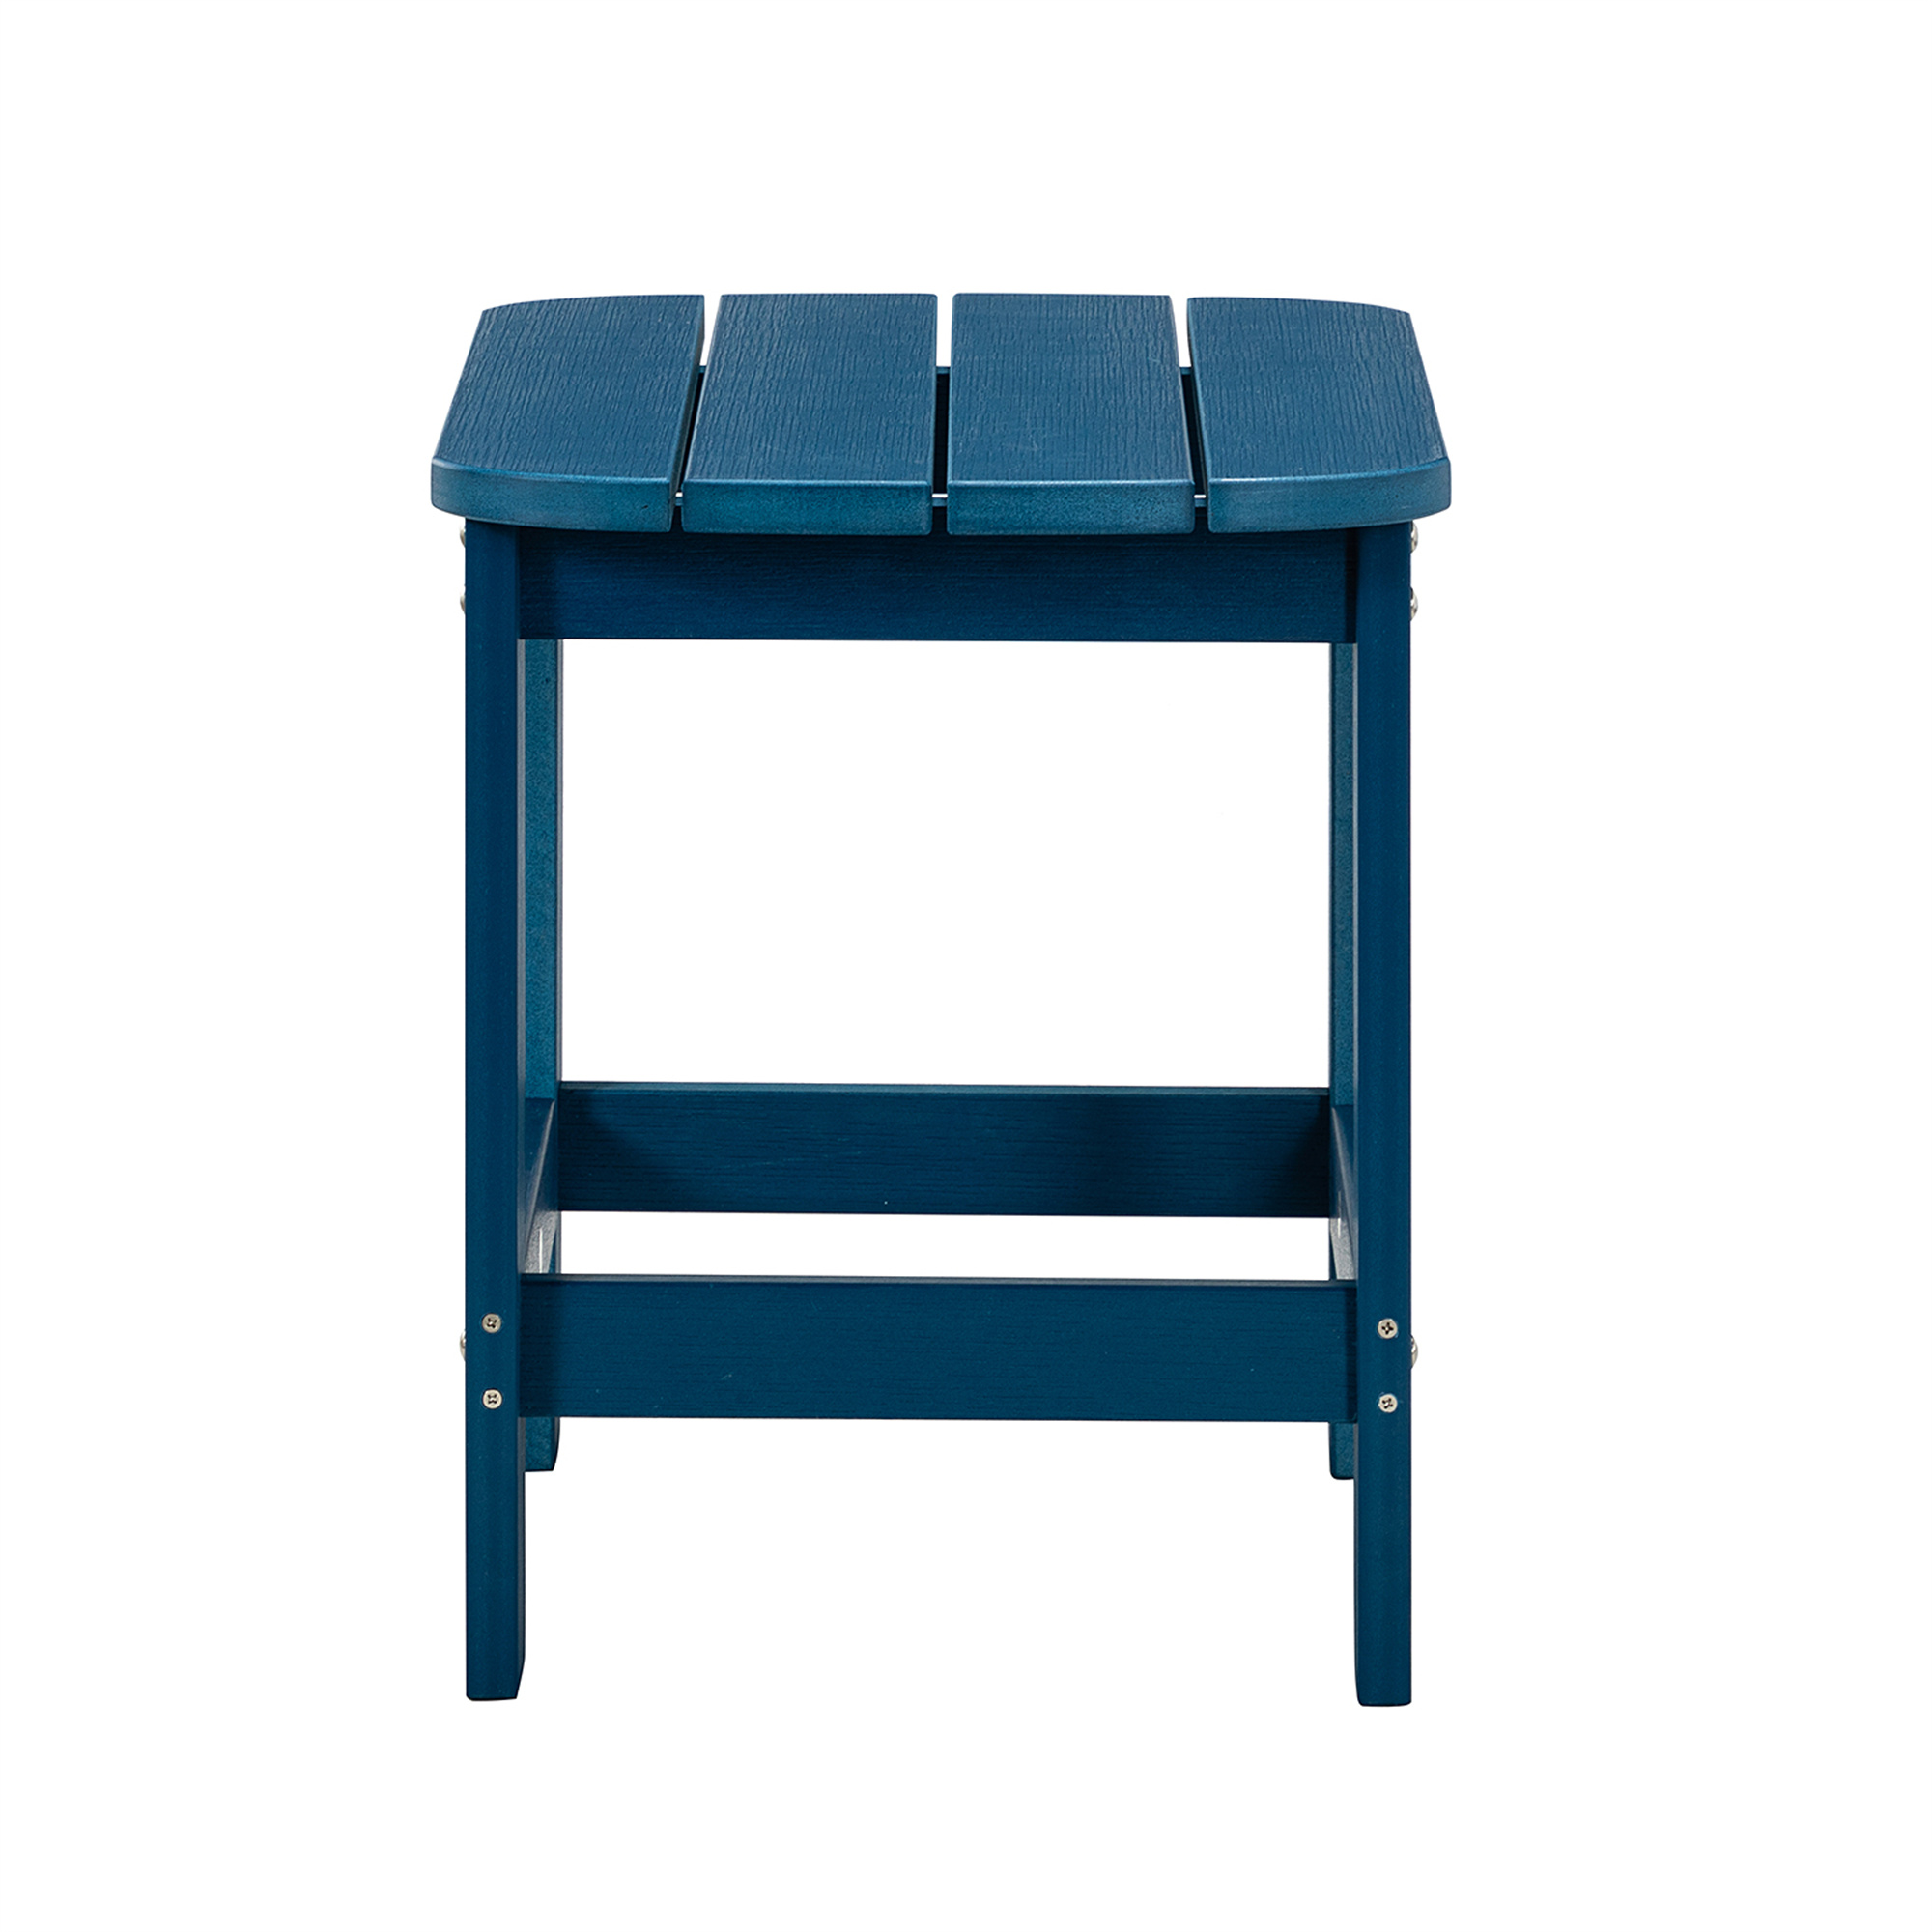 Cfowner Square Outdoor Side Table, Pool Composite Patio Table, End Tables for Backyard, Easy Maintenance, Navy - image 5 of 7